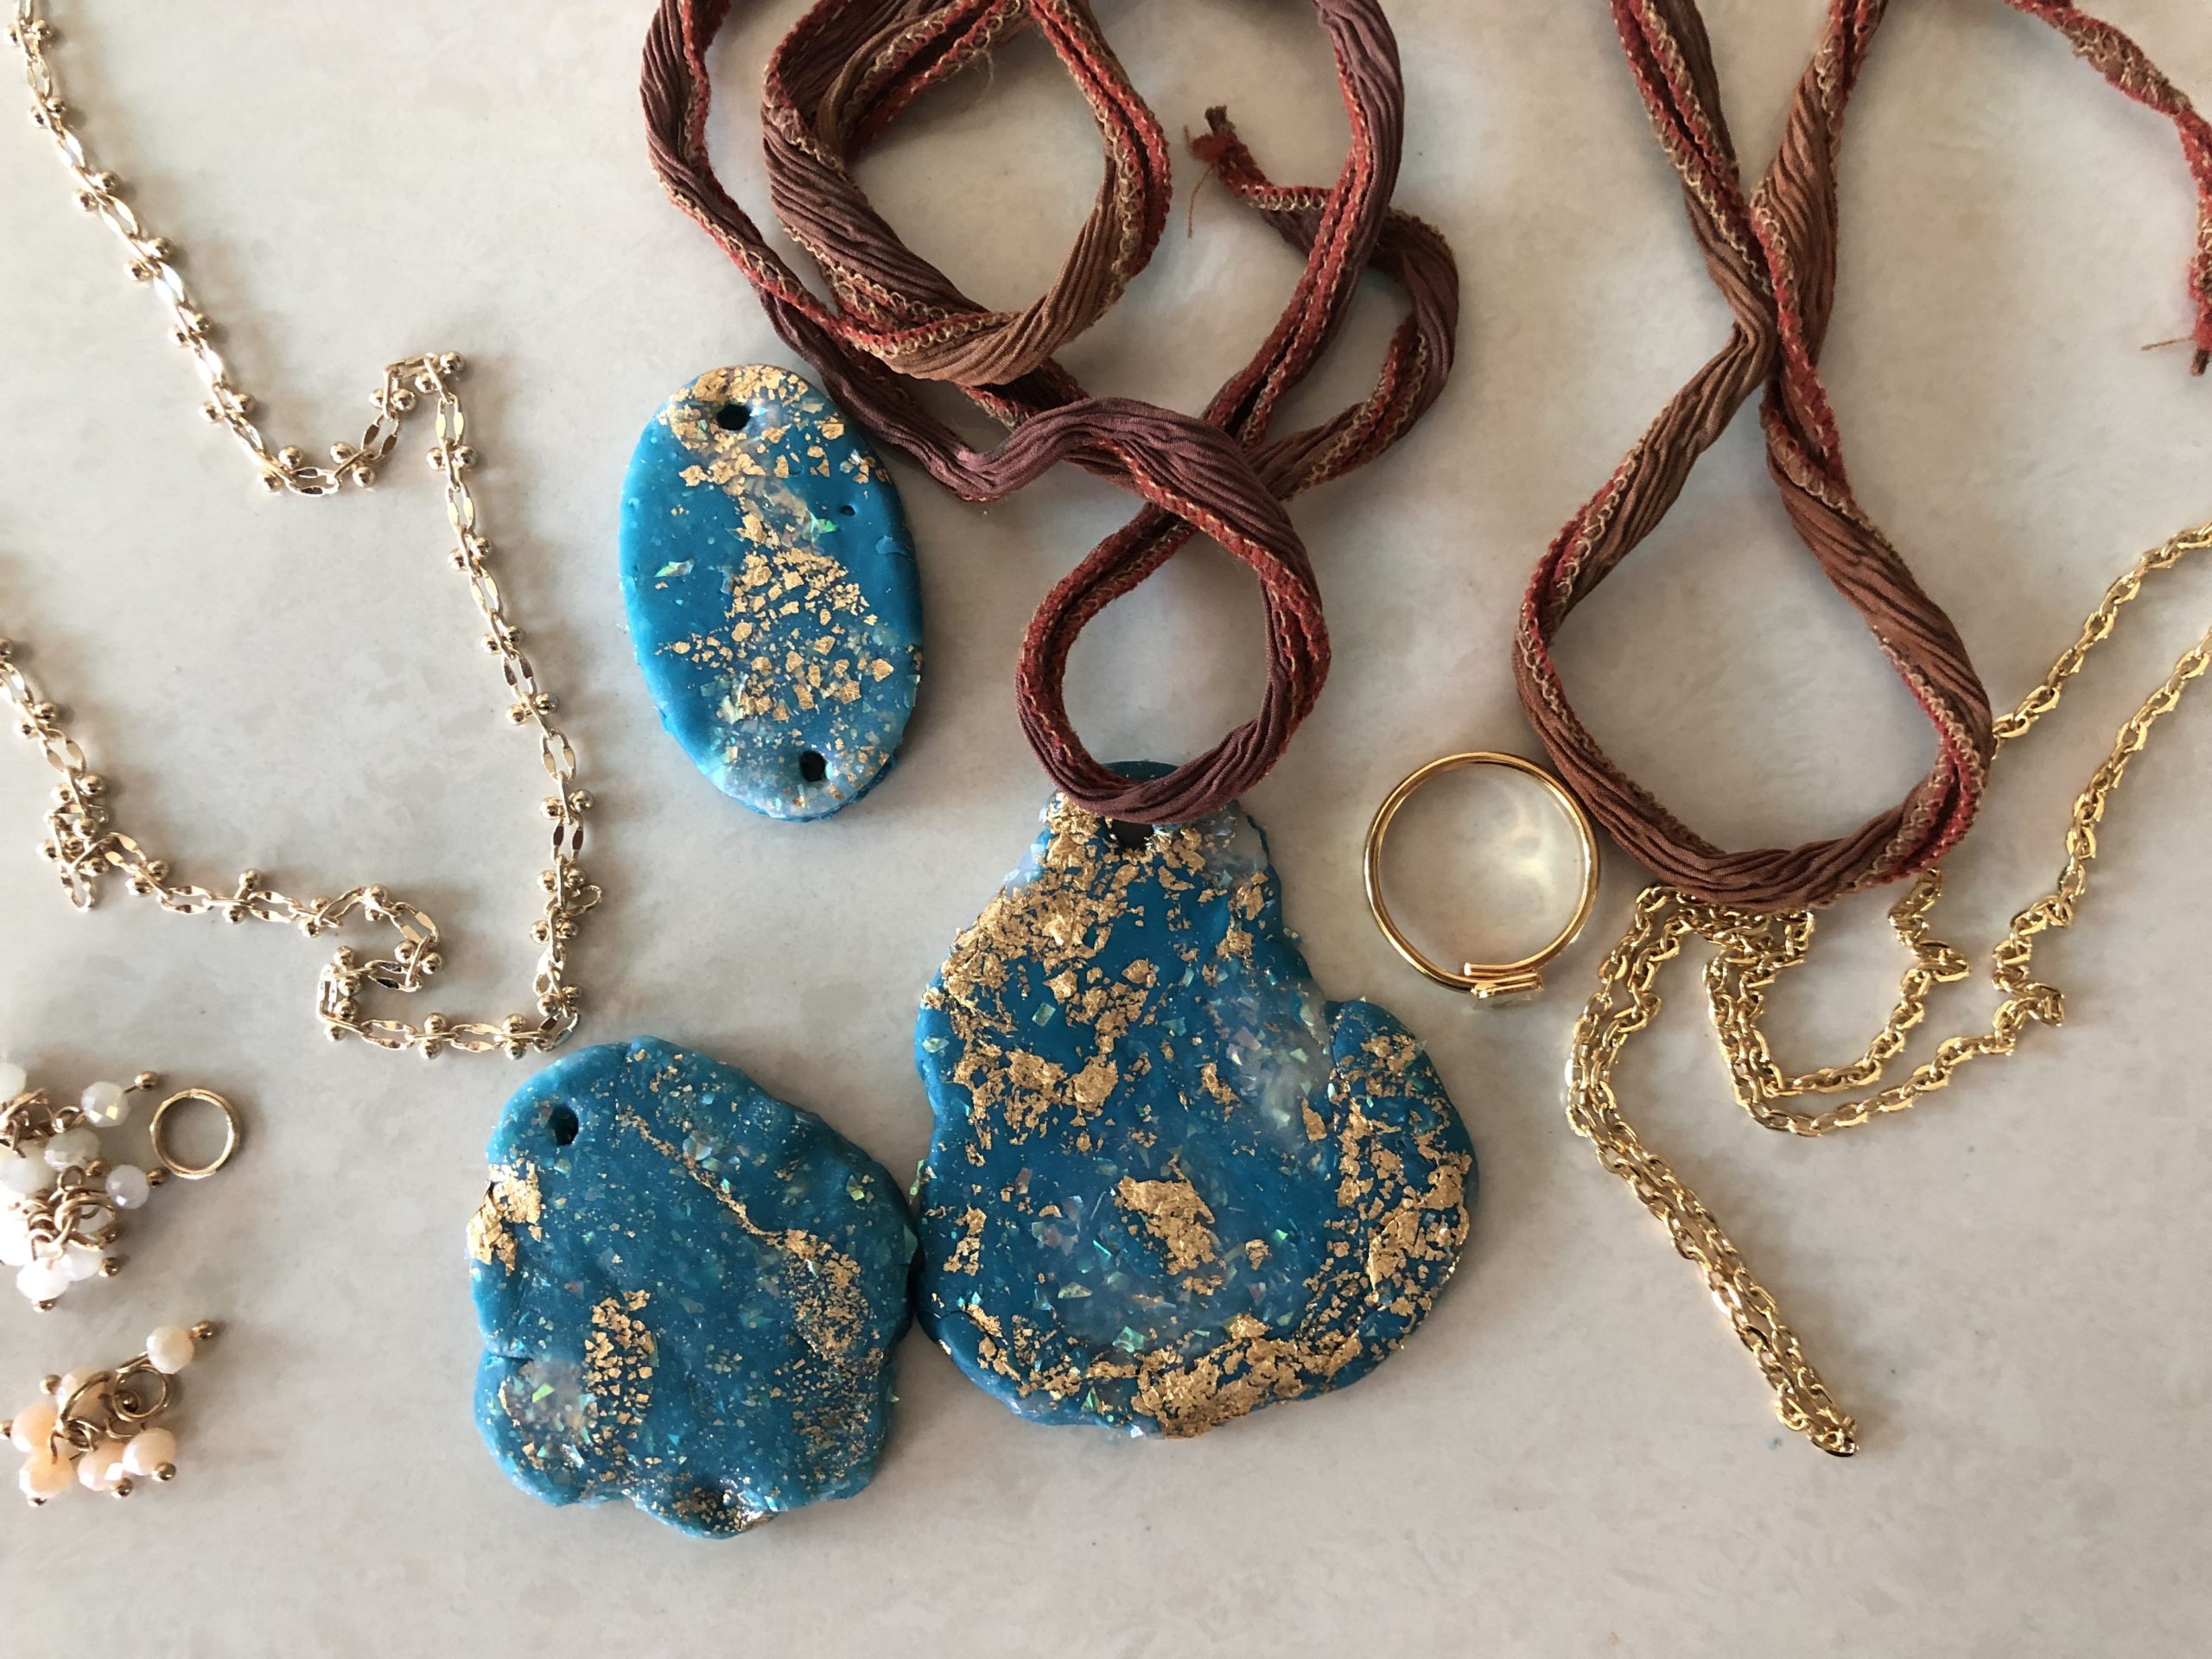 How to Make: 5 Faux Turquoise & Gold Jewelry Designs with Sculpey Premo  Polymer Clay  How to Tutorial! We are creating 5 different Faux Turquoise  Jewelry Designs with Sculpey Premo Polymer